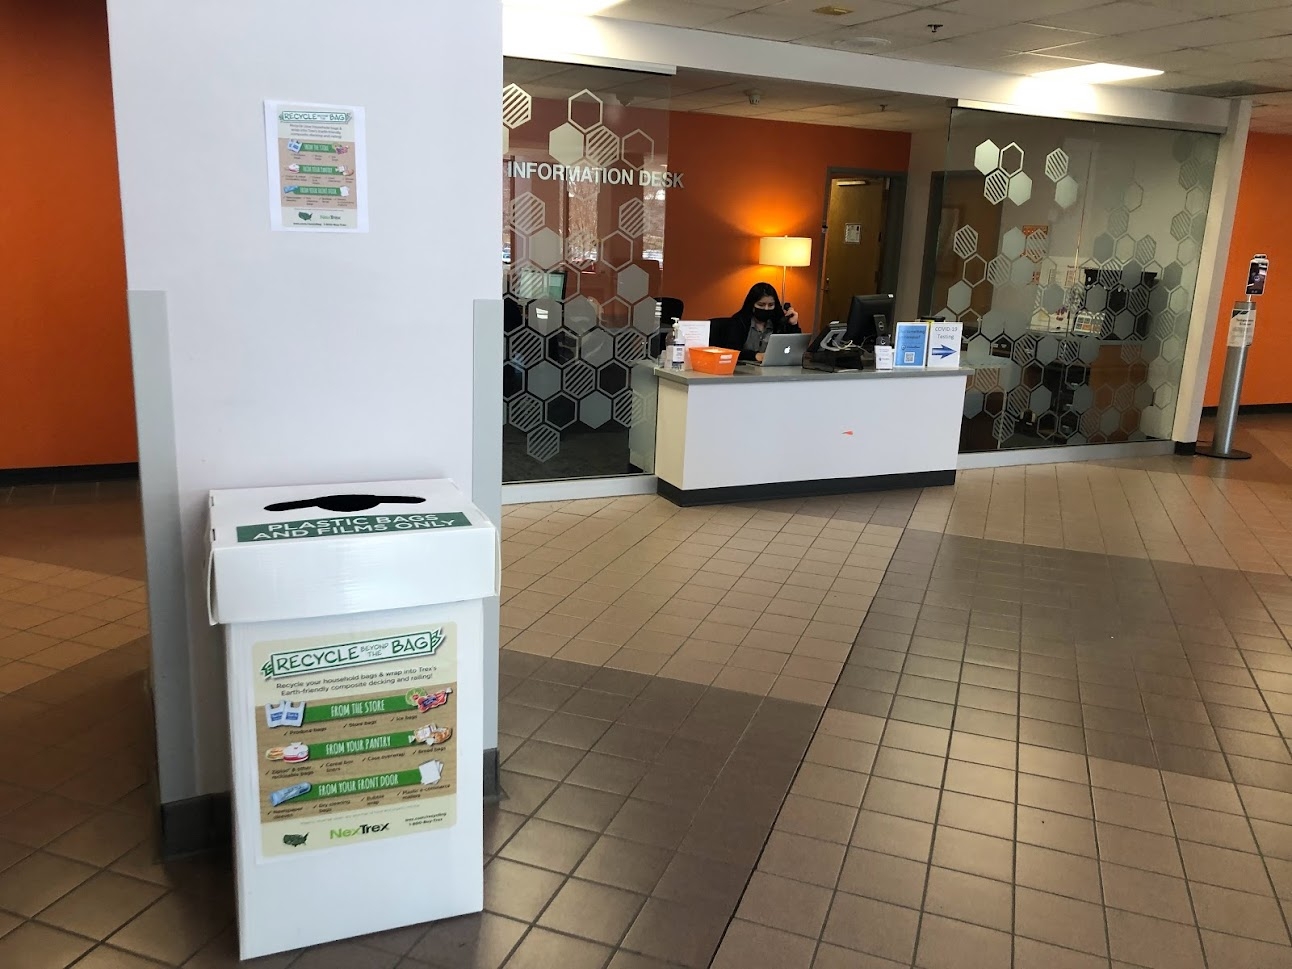 Plastic bag recycling bin located in Squires Student Center on the first floor to the left of the information desk against a large white pillar